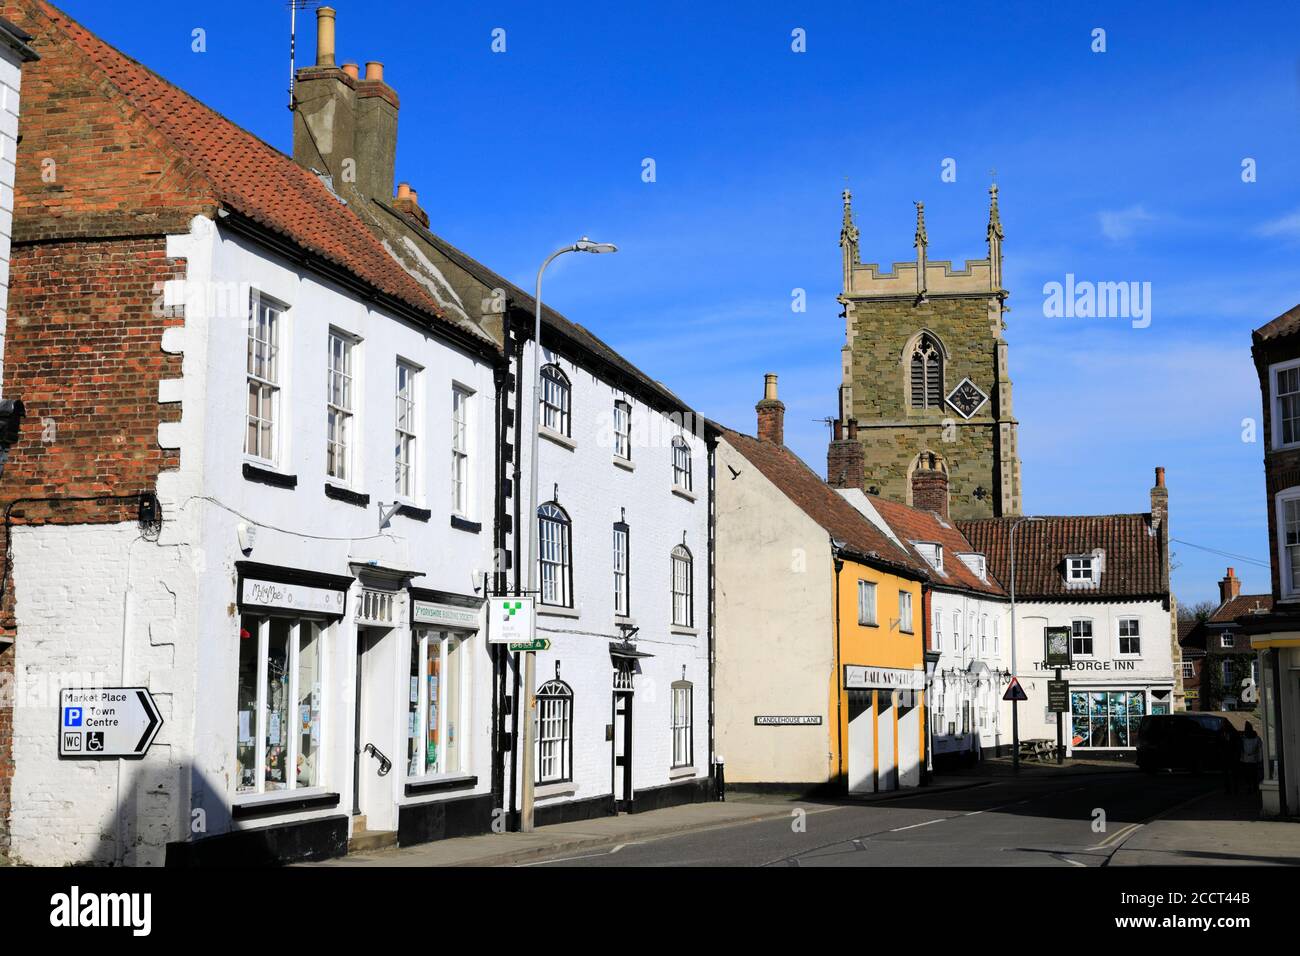 Alford lincolnshire hi-res stock photography and images - Alamy